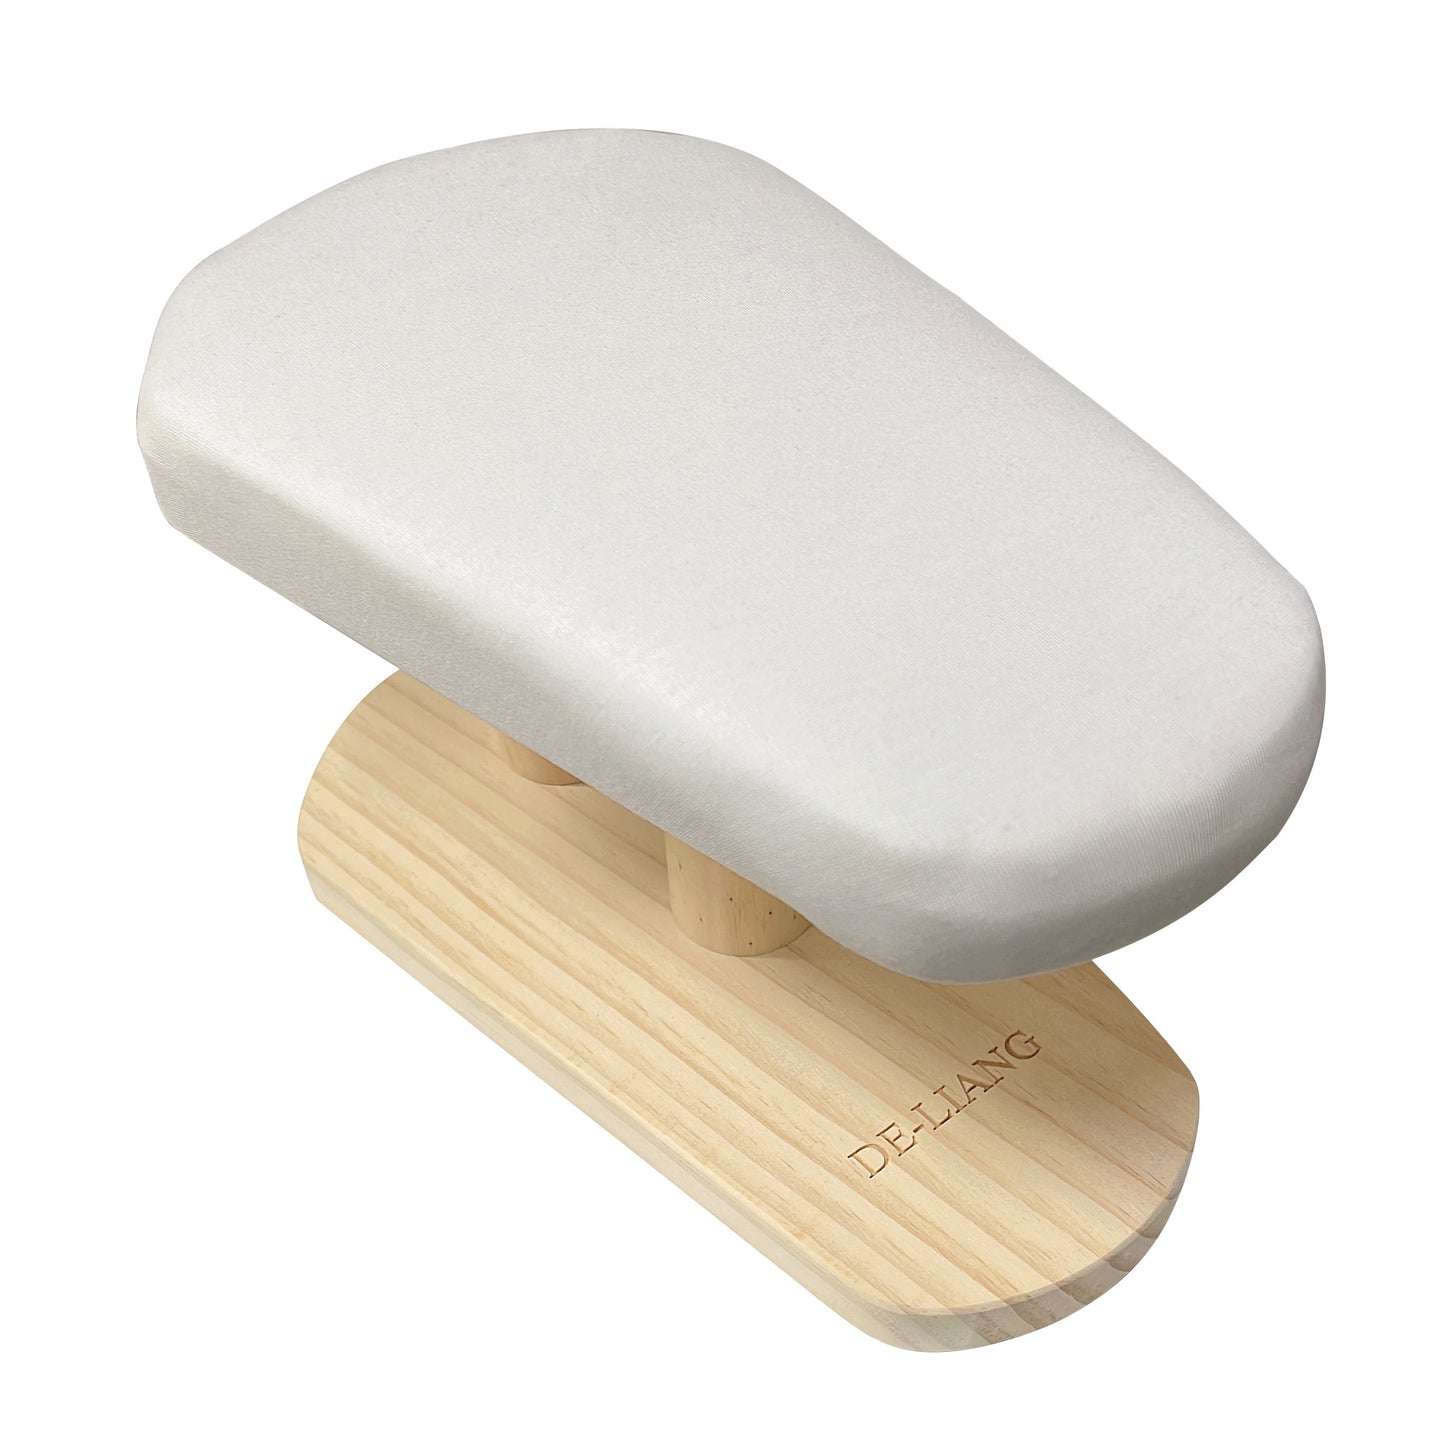 Multi-functional thickened solid wood ironing stool special ironing clothes small ironing table ironing tool household ironing board DLIB36-BEIGE